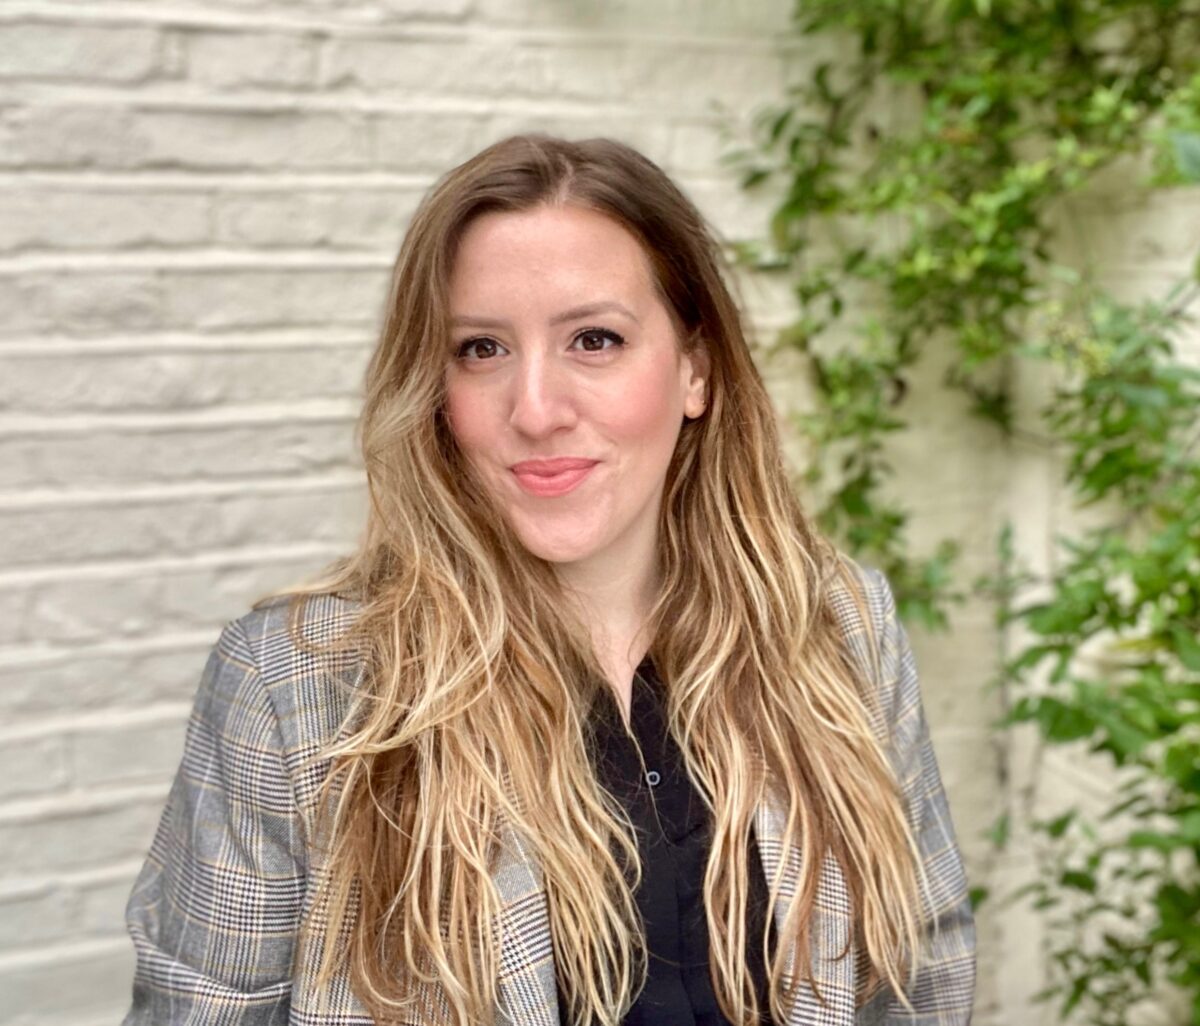 M&C Saatchi Talk has appointed Shelley Portet to the executive board in the new role of head of content and social.